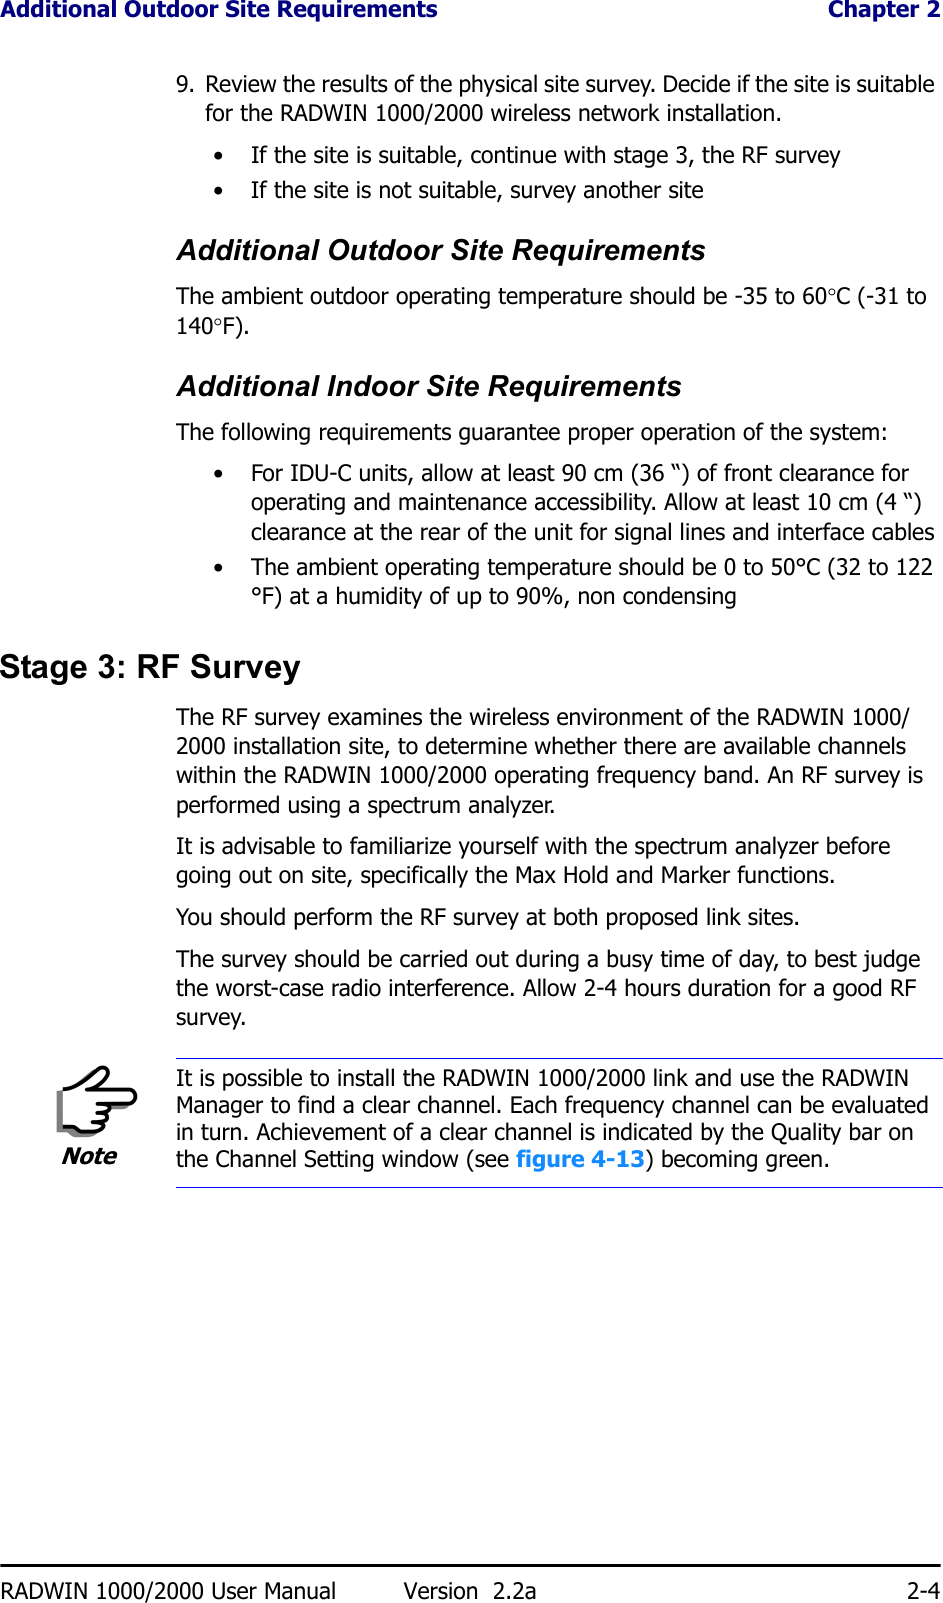 Additional Outdoor Site Requirements  Chapter 2RADWIN 1000/2000 User Manual Version  2.2a 2-49. Review the results of the physical site survey. Decide if the site is suitable for the RADWIN 1000/2000 wireless network installation.• If the site is suitable, continue with stage 3, the RF survey• If the site is not suitable, survey another siteAdditional Outdoor Site RequirementsThe ambient outdoor operating temperature should be -35 to 60°C (-31 to 140°F).Additional Indoor Site RequirementsThe following requirements guarantee proper operation of the system:• For IDU-C units, allow at least 90 cm (36 “) of front clearance for operating and maintenance accessibility. Allow at least 10 cm (4 “) clearance at the rear of the unit for signal lines and interface cables• The ambient operating temperature should be 0 to 50°C (32 to 122 °F) at a humidity of up to 90%, non condensingStage 3: RF SurveyThe RF survey examines the wireless environment of the RADWIN 1000/2000 installation site, to determine whether there are available channels within the RADWIN 1000/2000 operating frequency band. An RF survey is performed using a spectrum analyzer.It is advisable to familiarize yourself with the spectrum analyzer before going out on site, specifically the Max Hold and Marker functions.You should perform the RF survey at both proposed link sites.The survey should be carried out during a busy time of day, to best judge the worst-case radio interference. Allow 2-4 hours duration for a good RF survey.NoteIt is possible to install the RADWIN 1000/2000 link and use the RADWIN Manager to find a clear channel. Each frequency channel can be evaluated in turn. Achievement of a clear channel is indicated by the Quality bar on the Channel Setting window (see figure 4-13) becoming green.